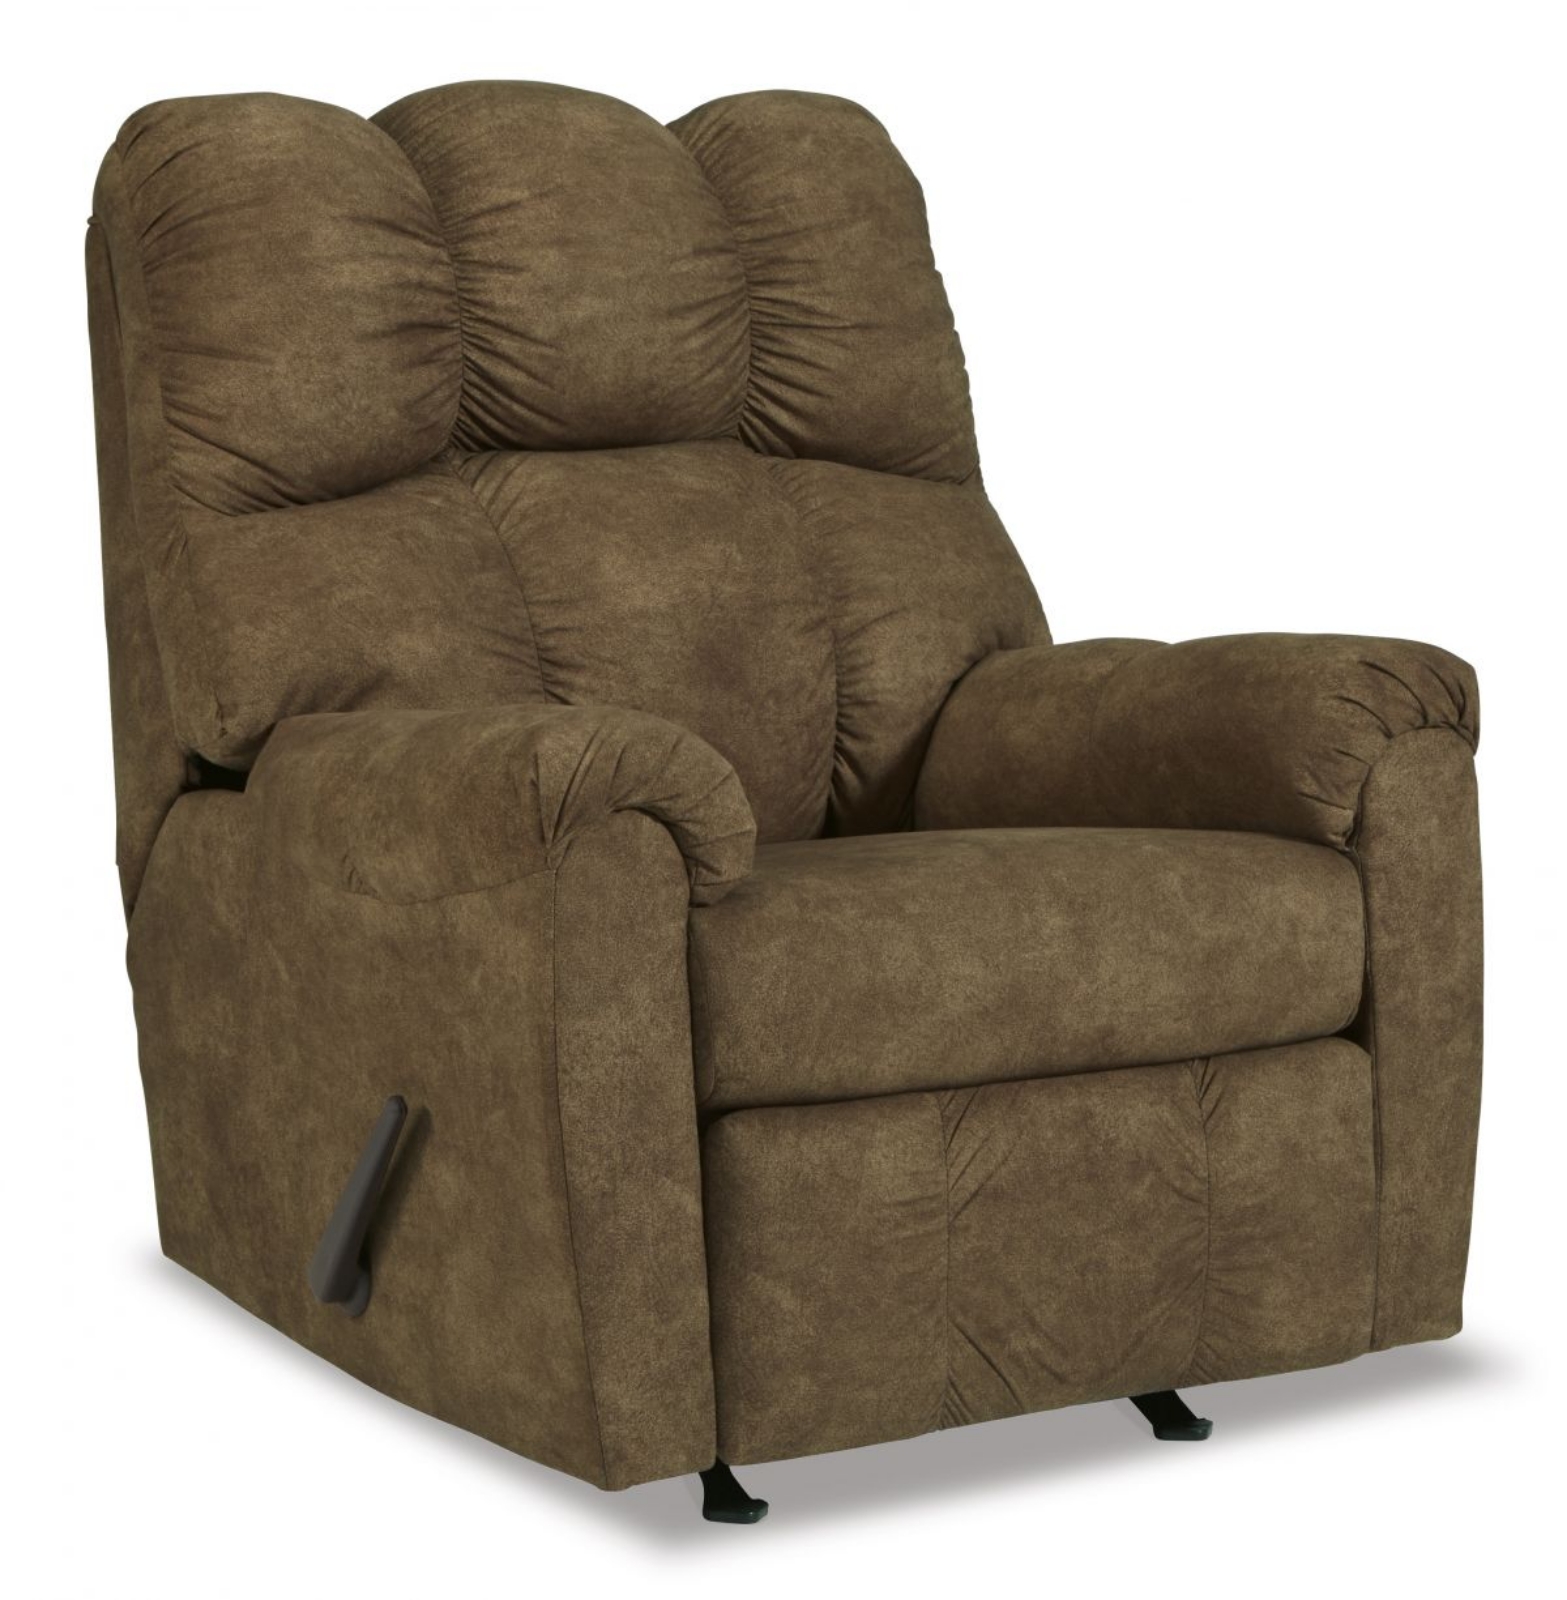 Picture of Potrol Recliner